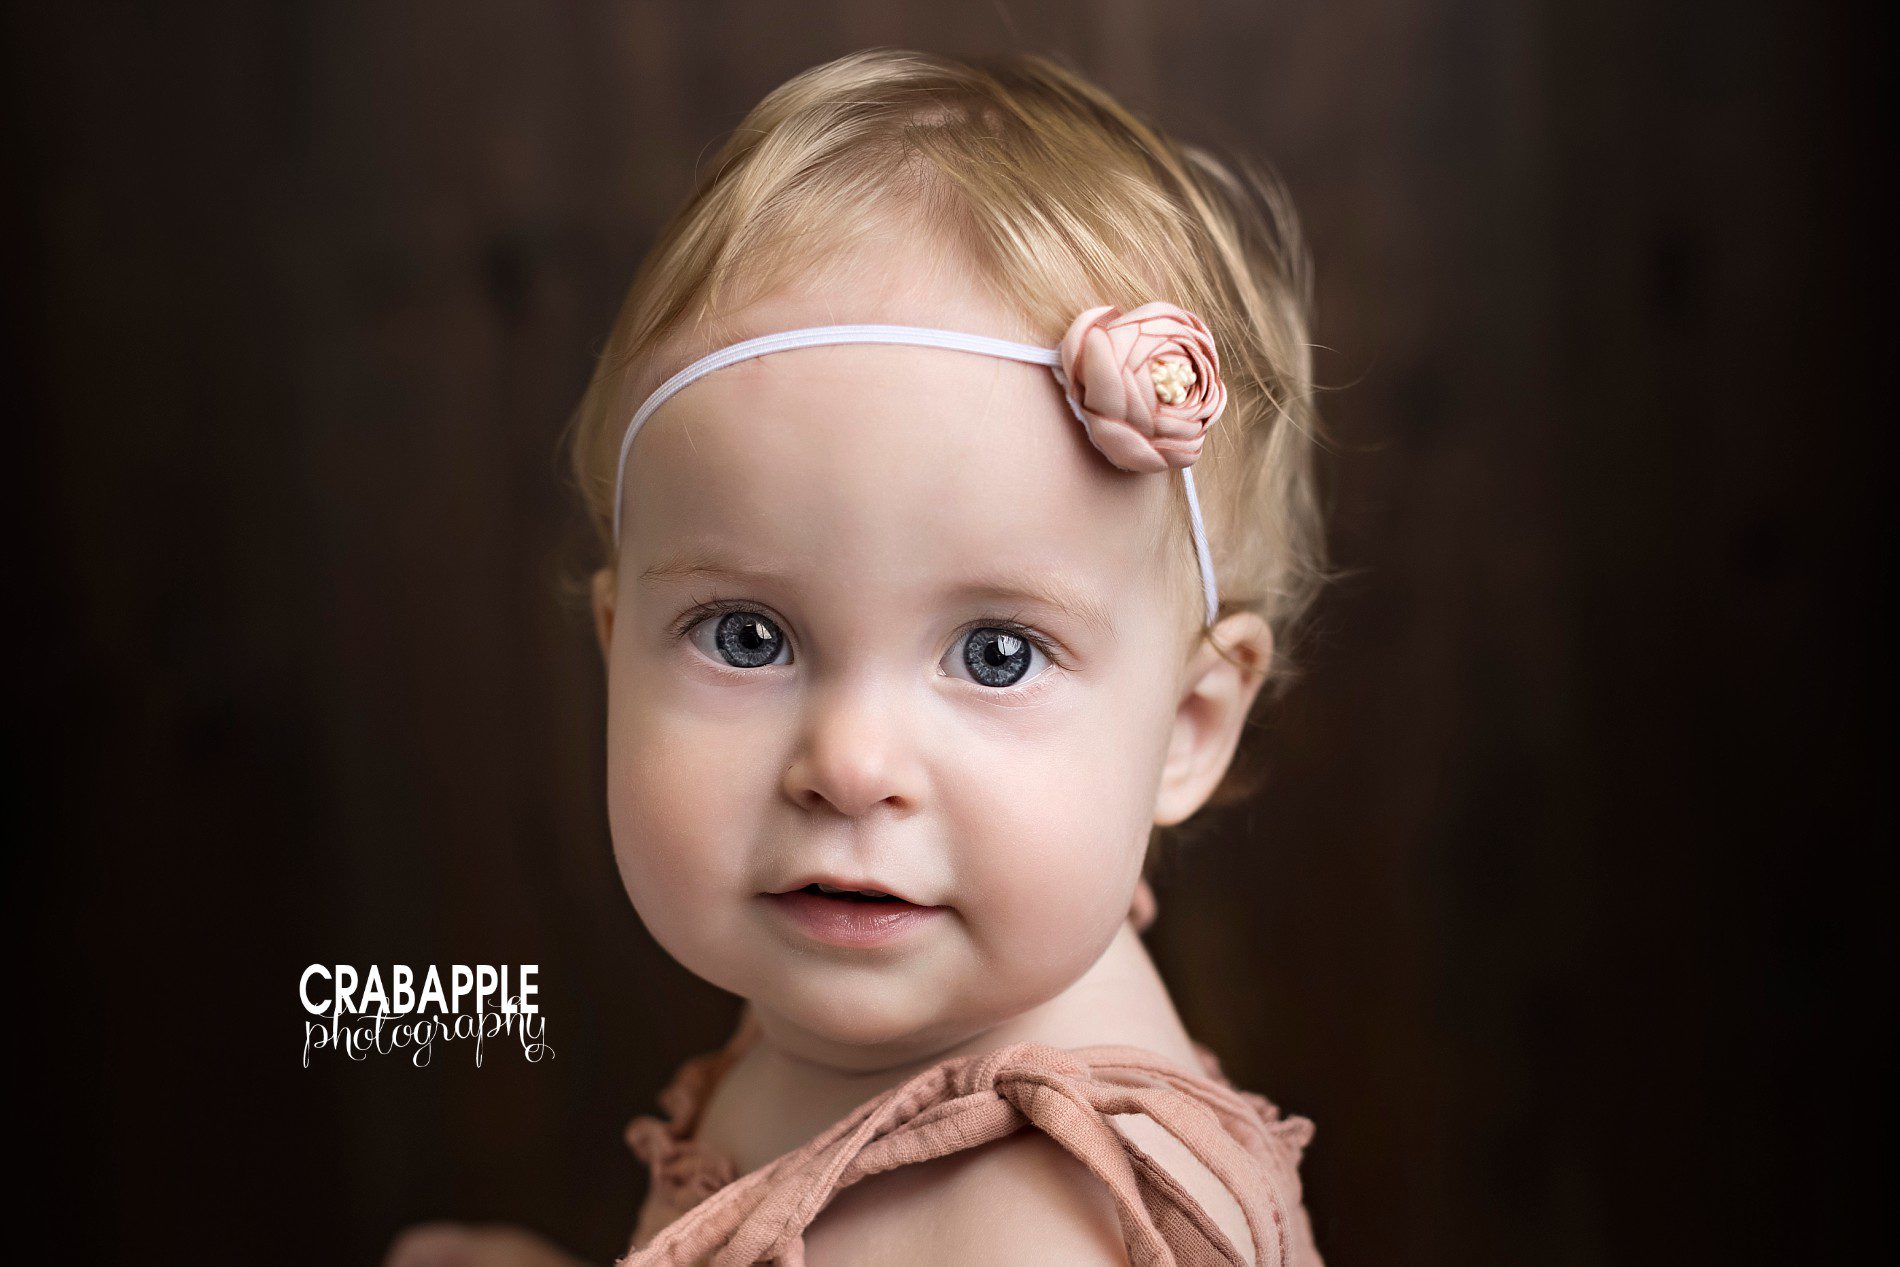 Baby portrait photography inspiration for one year olds